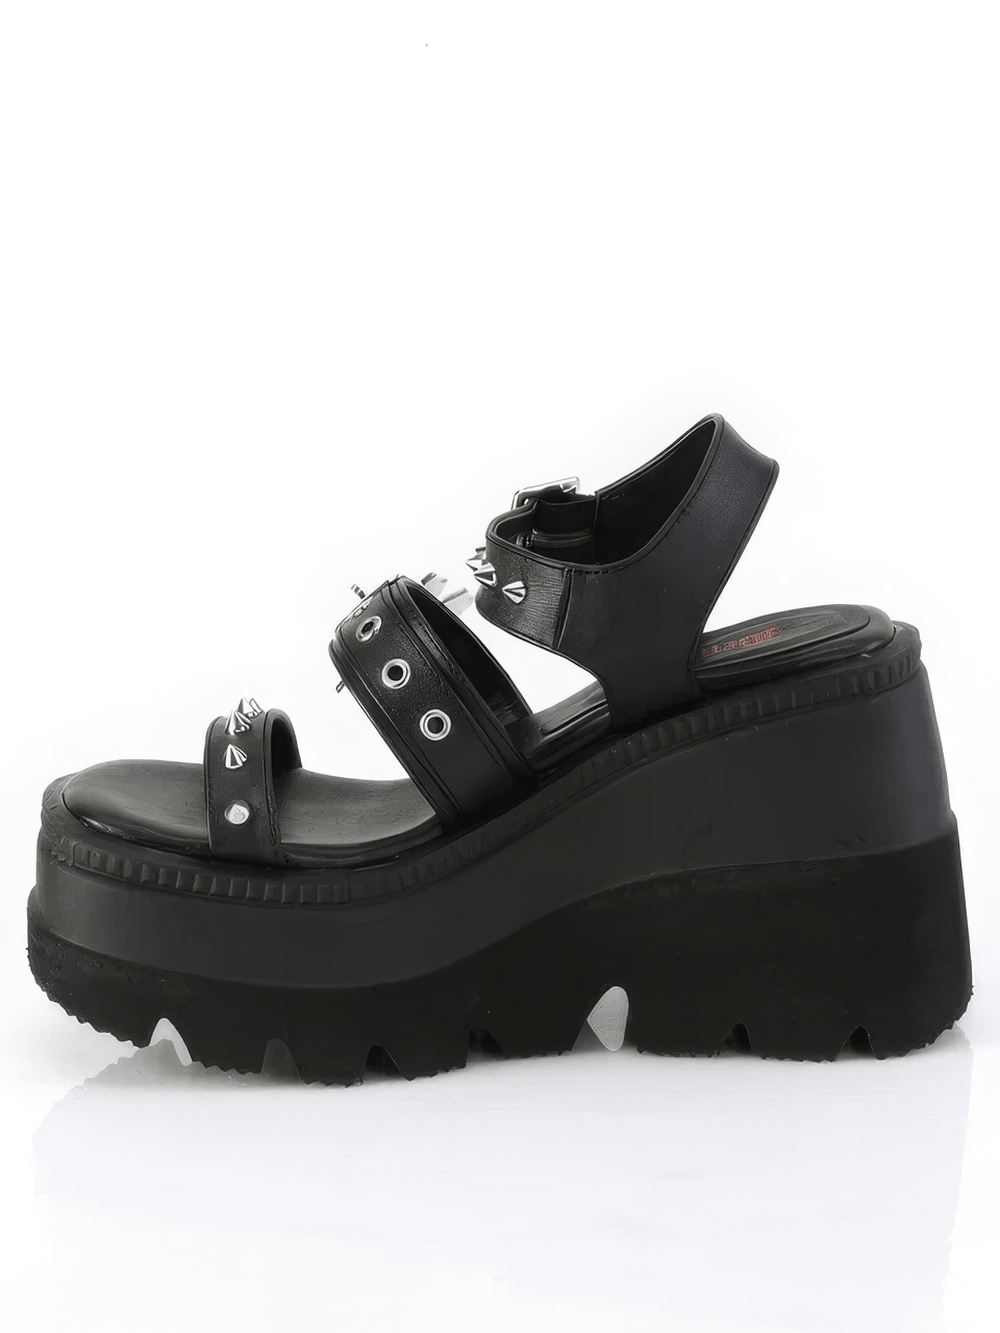 DEMONIA Platform Sandals with Studs and Heart Buckle